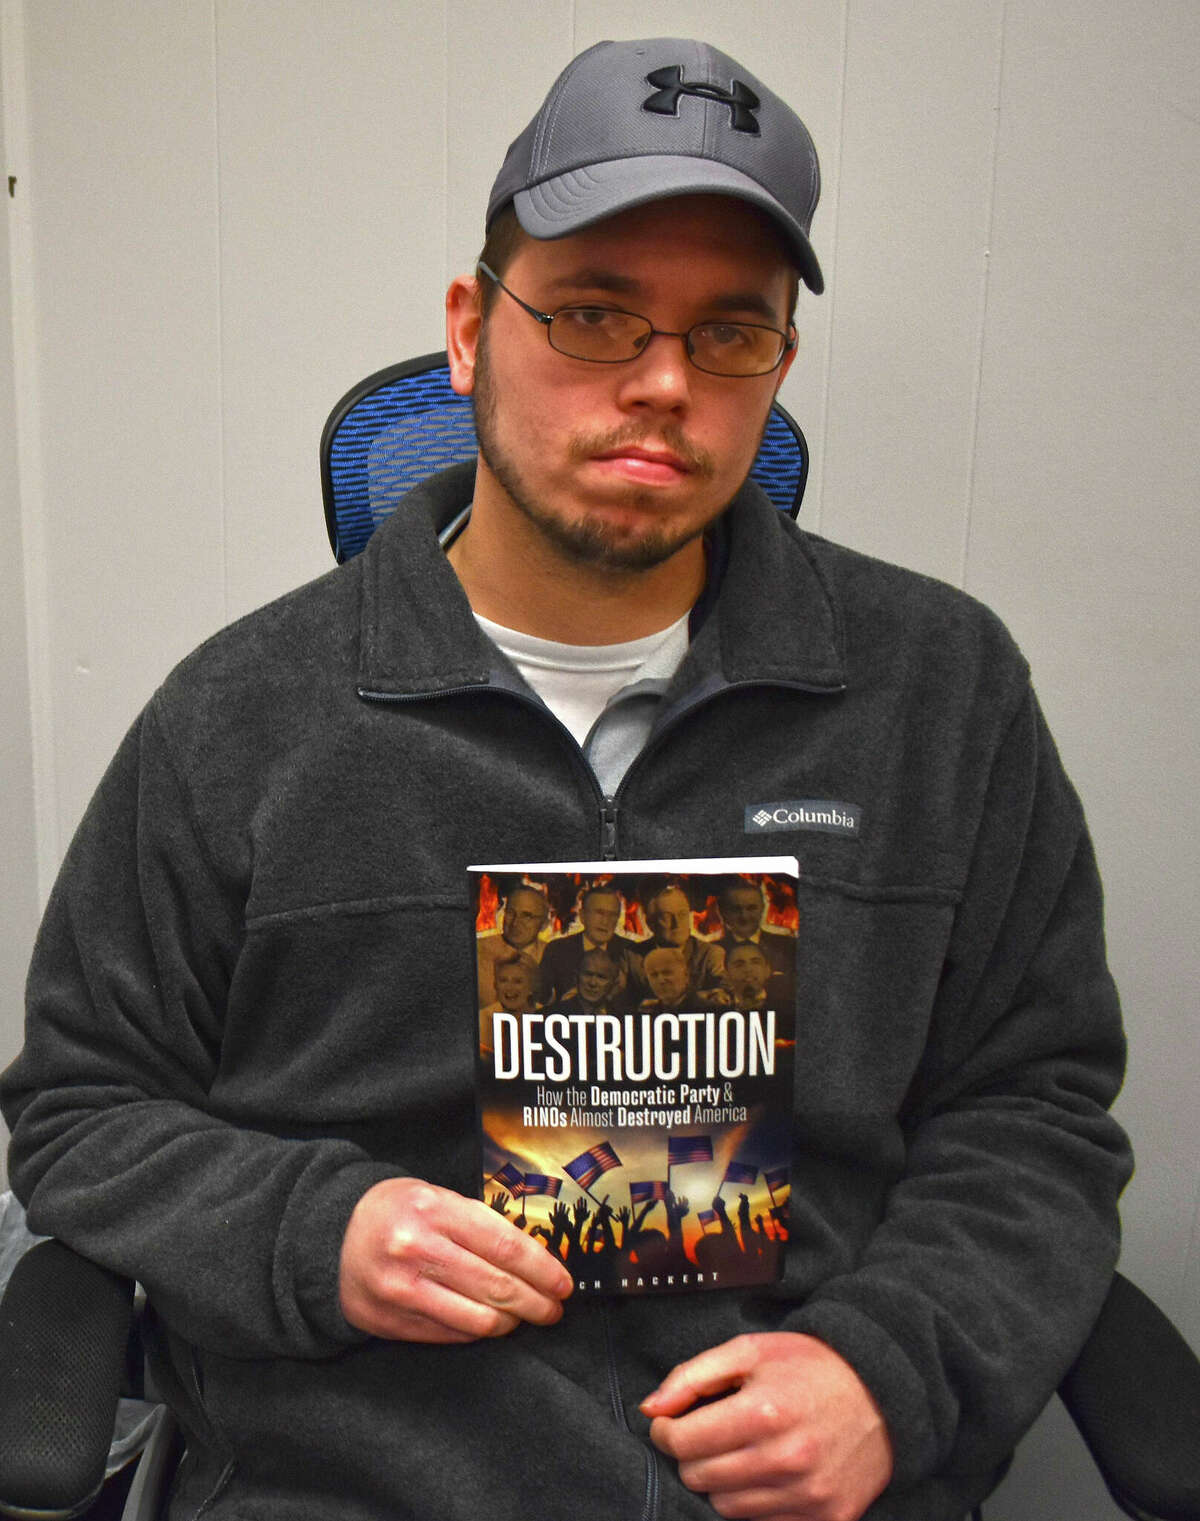 Zach Hackert, a 2021 graduate of Illinois College and a Navy veteran, has written his first book, "Destruction: How the Democratic Party & RINOs Almost Destroyed America." It was published by Defiance Press & Publishing and released in December.